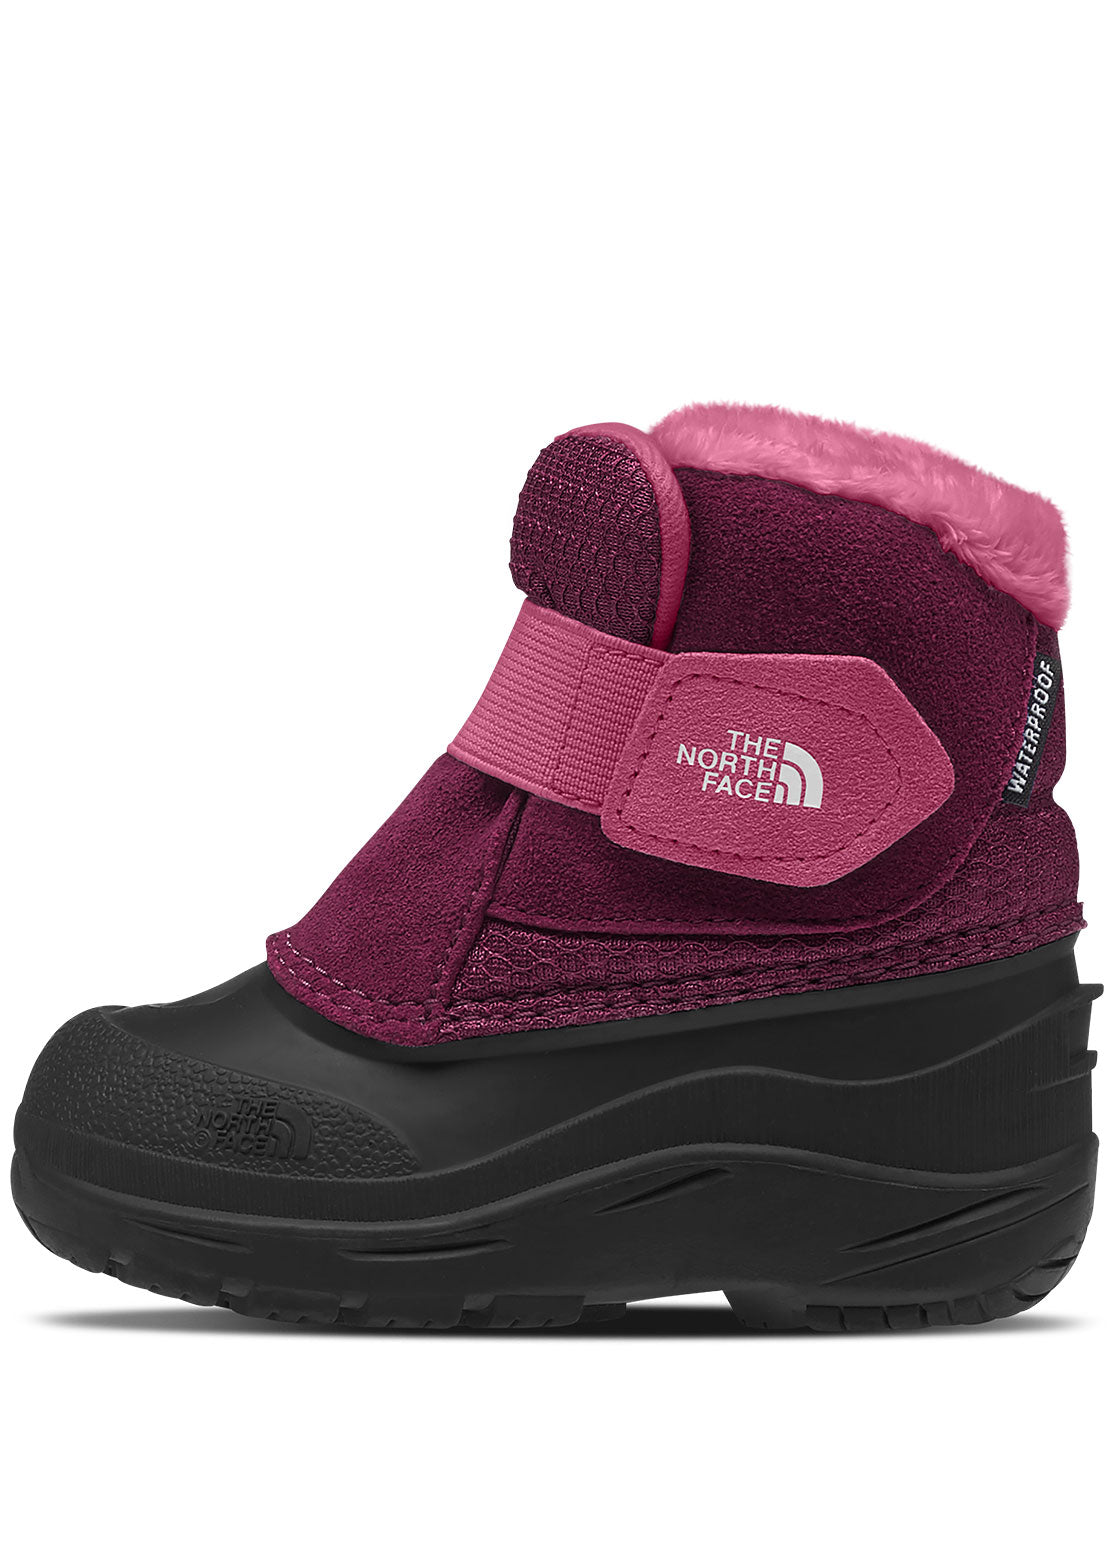 The North Face Toddler Alpenglow II Boots Boysenberry/TNF Black